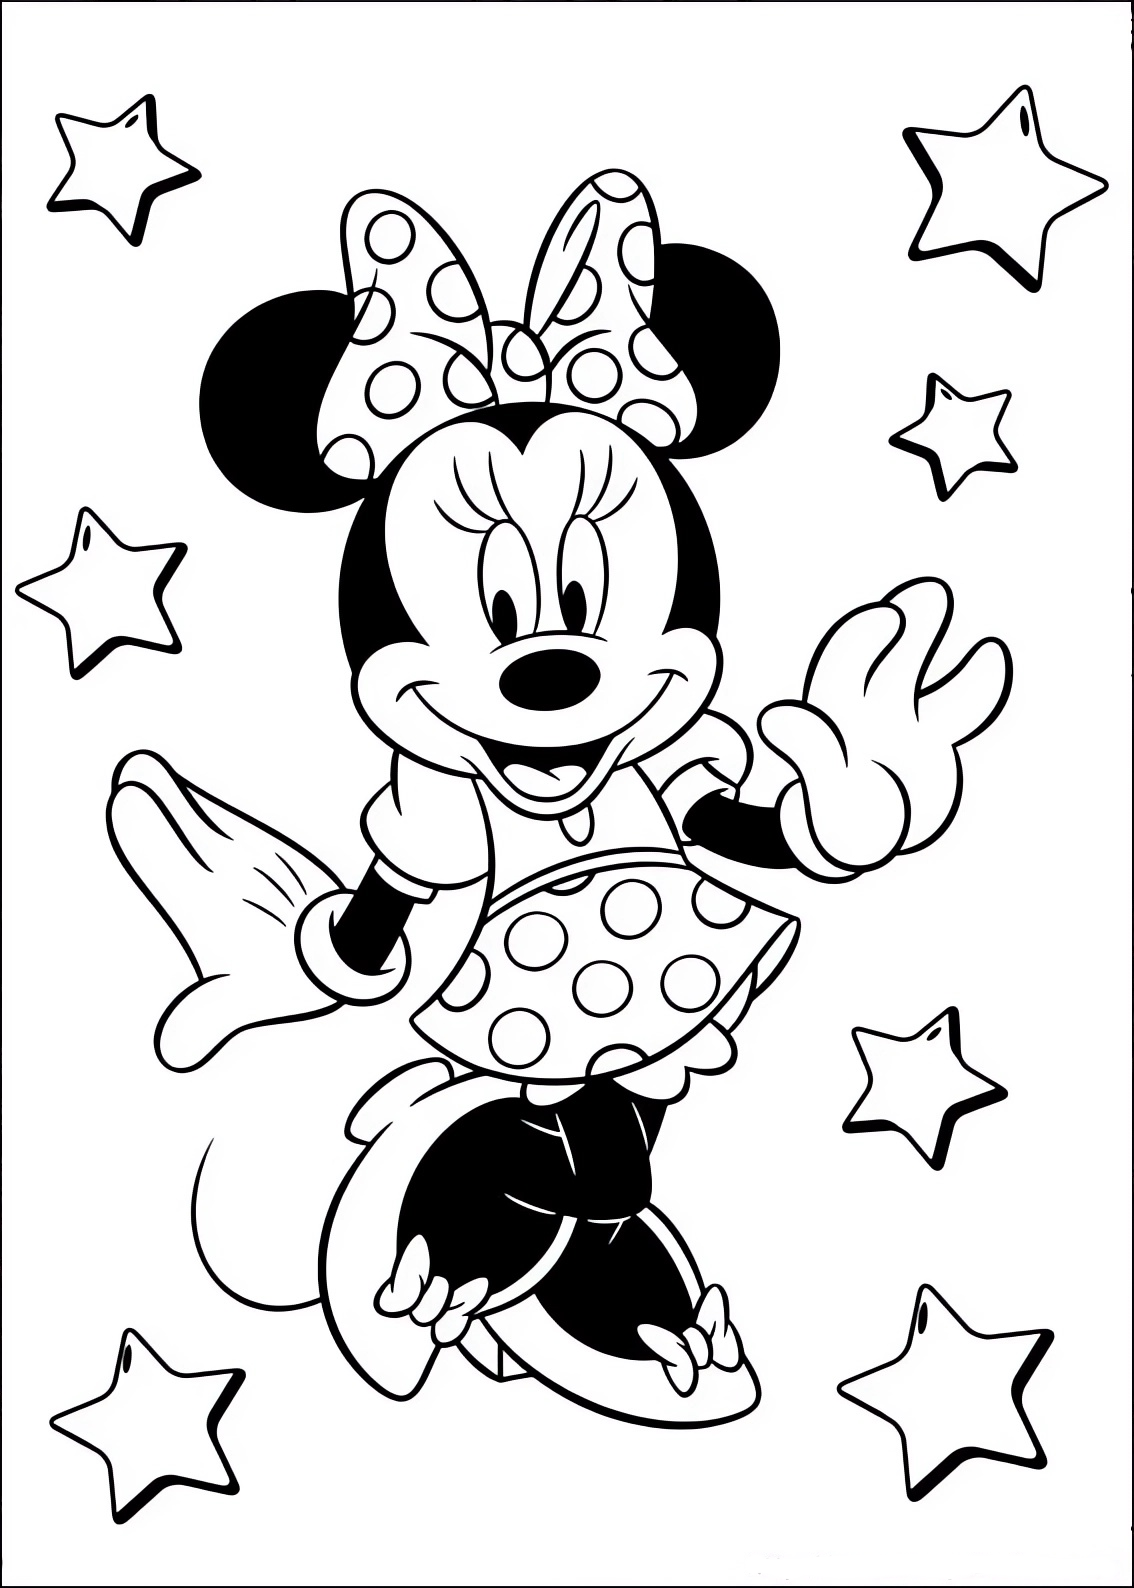 Coloring page of Minnie among the stars